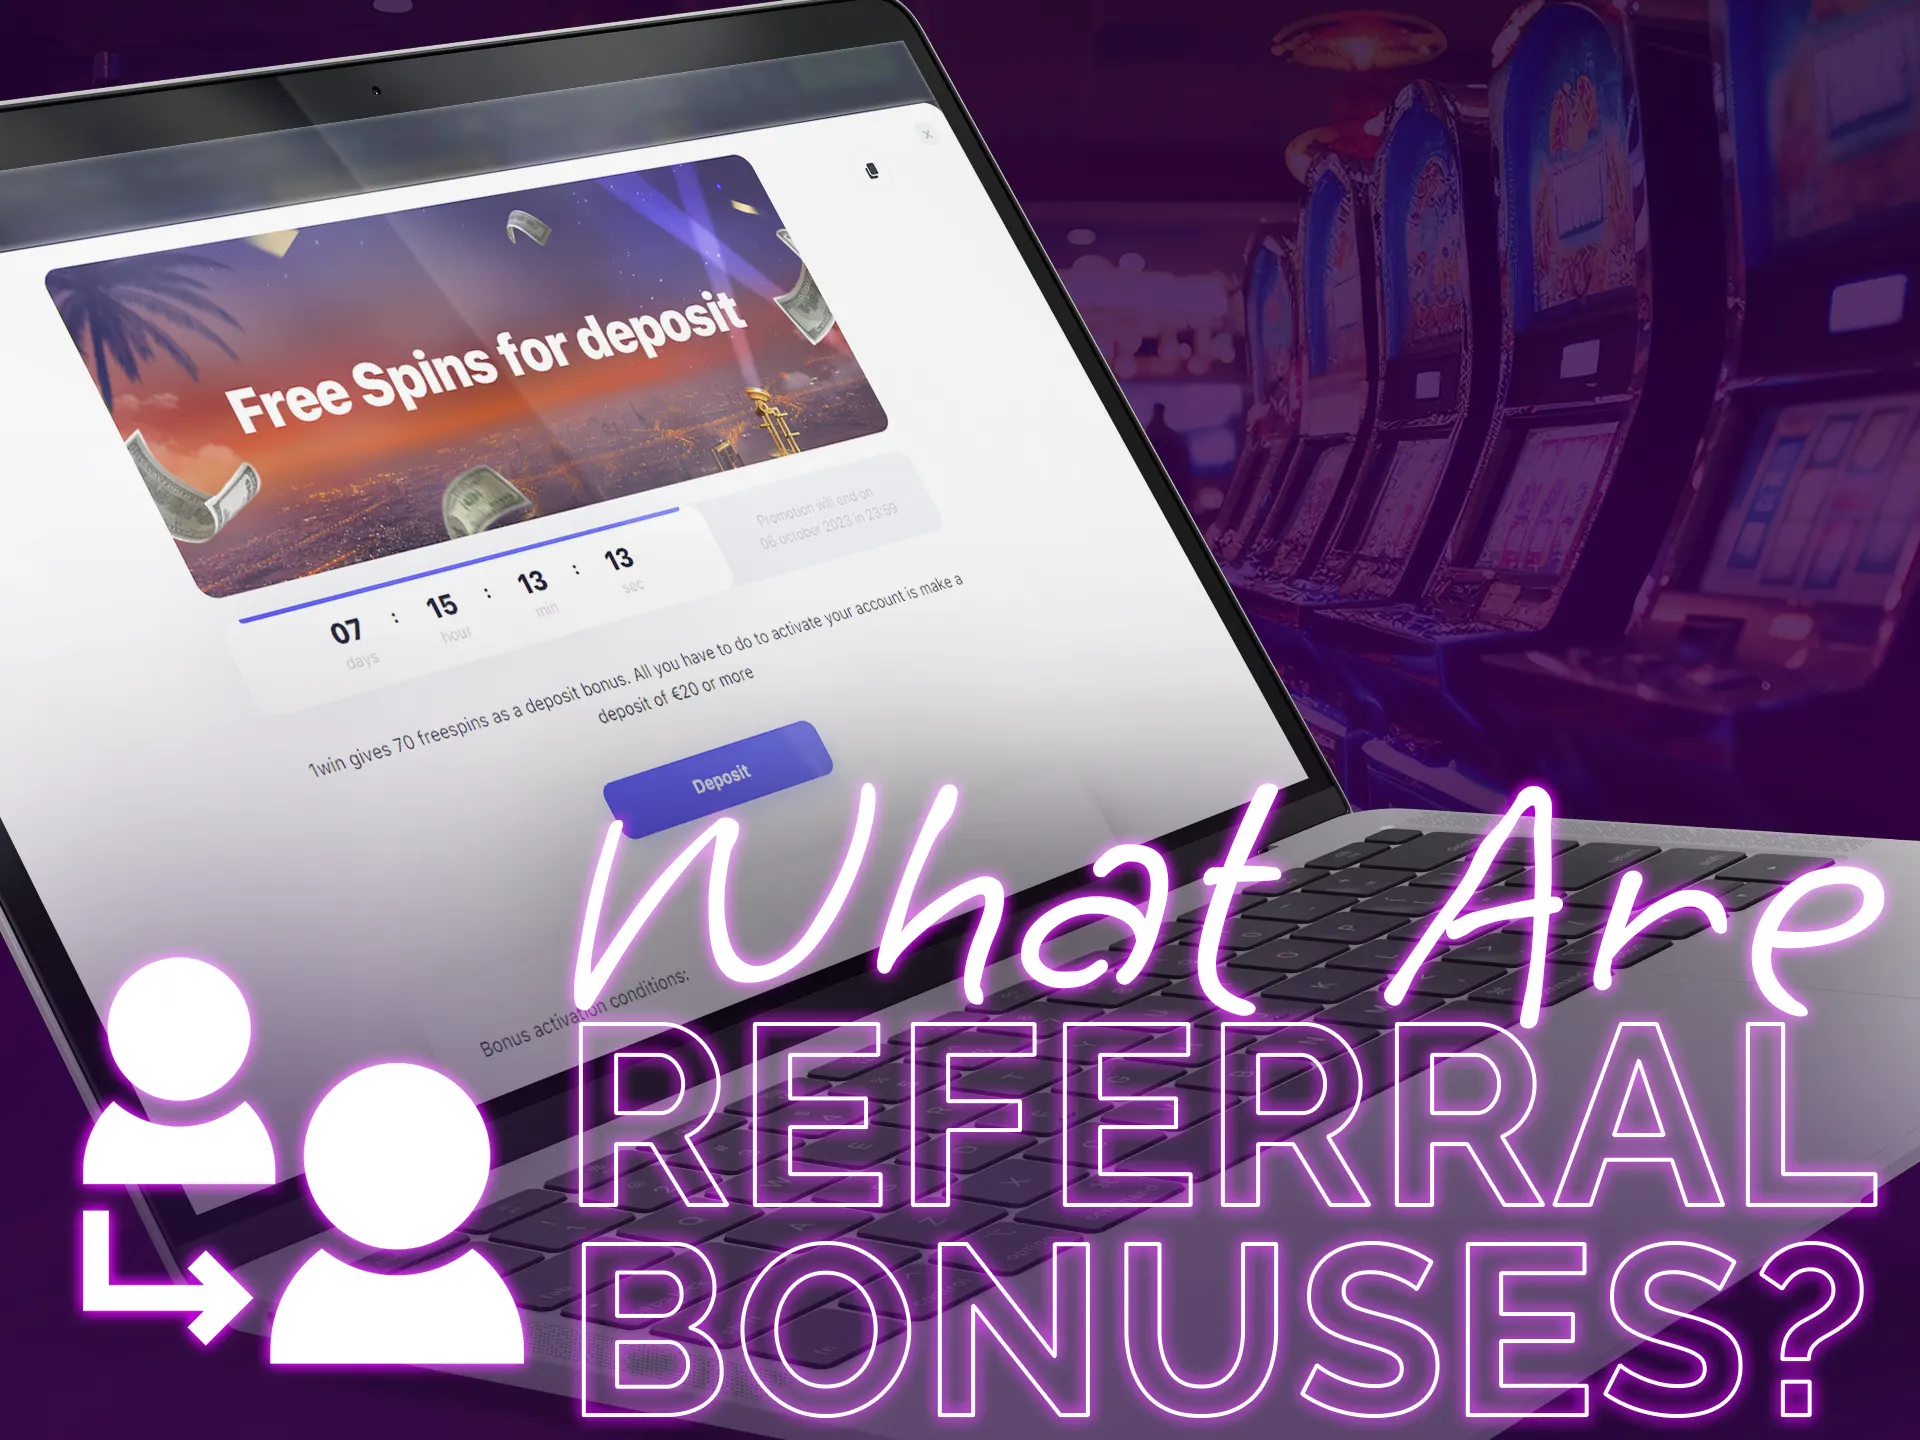 Learn what referral bonuses are.